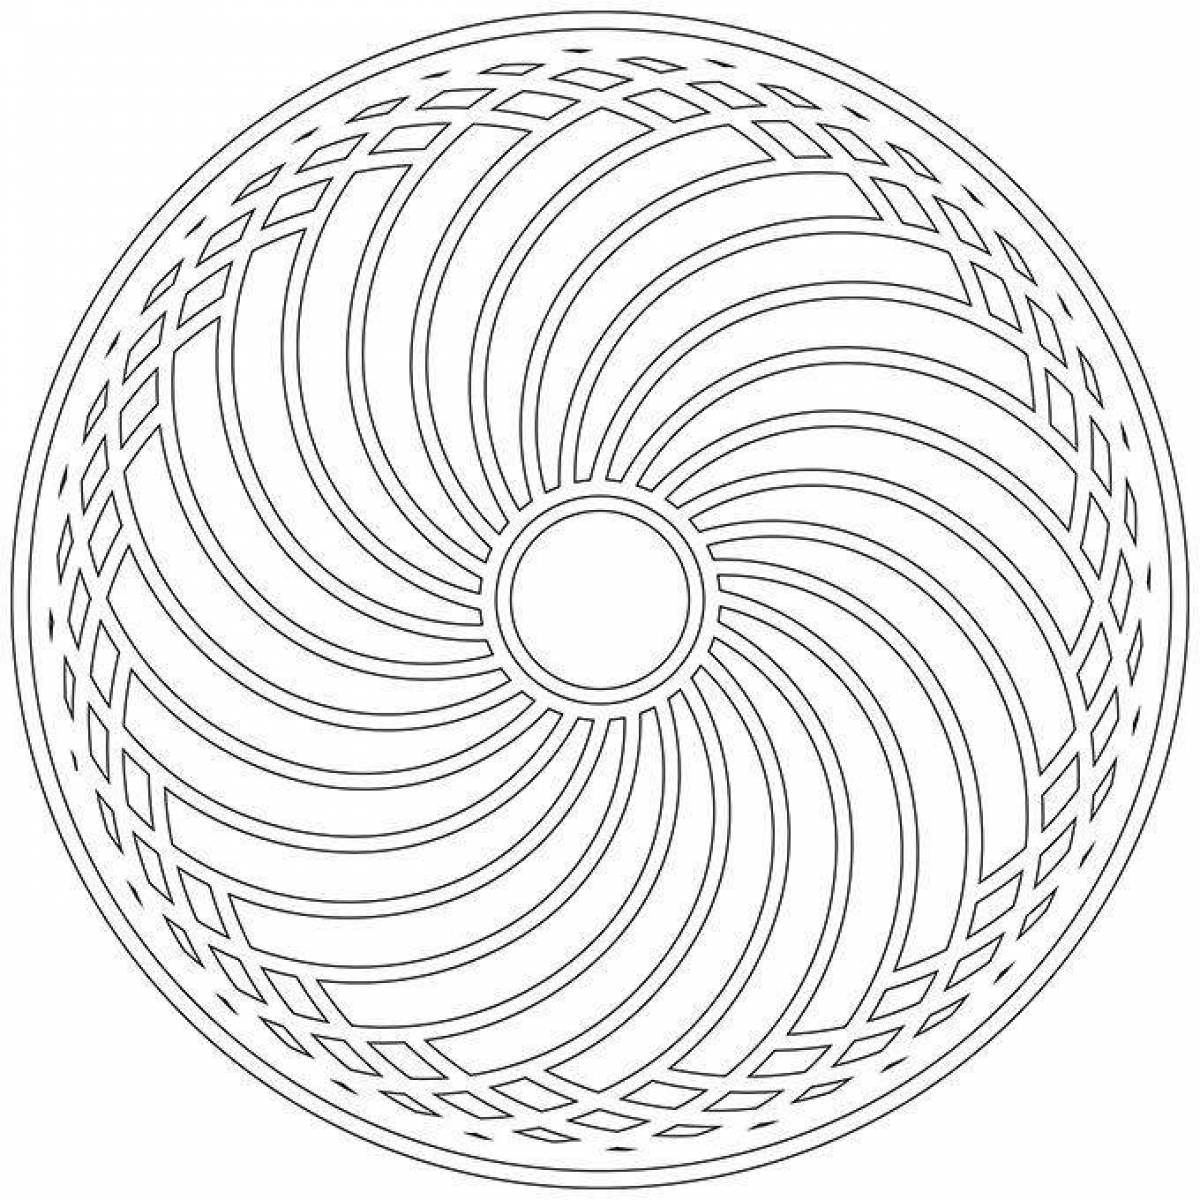 Coloring page adorable anti-stress spirals